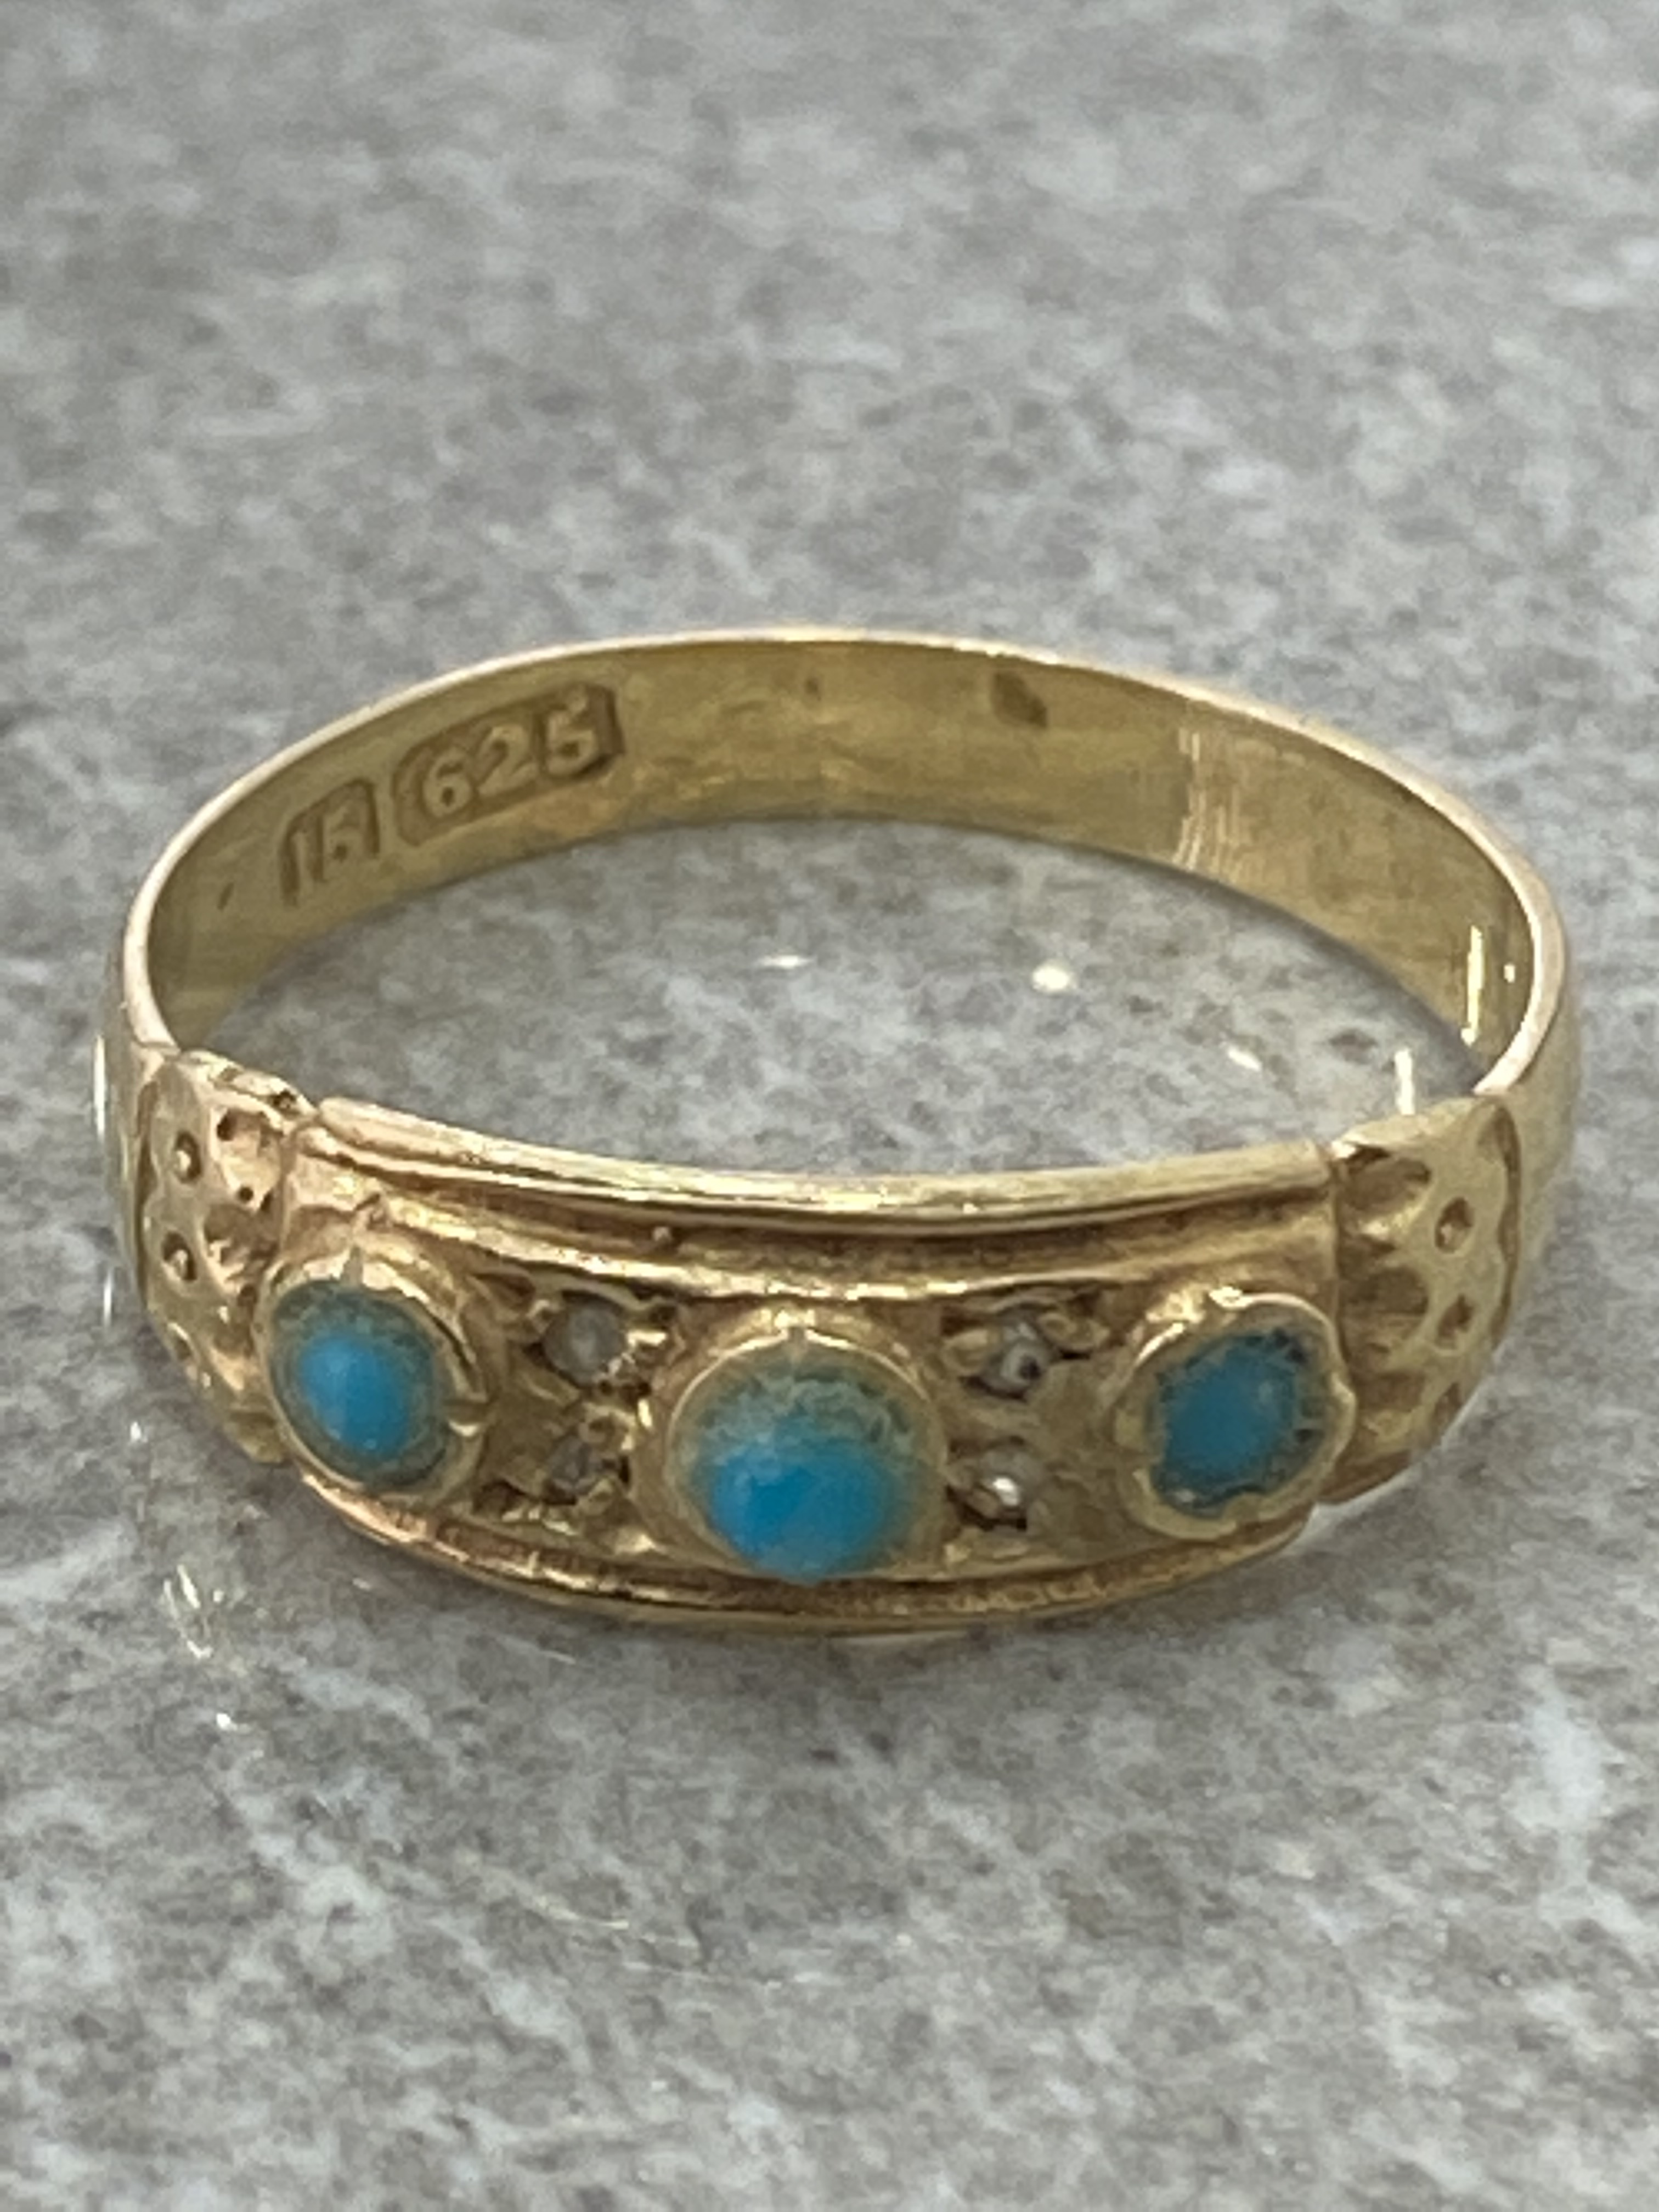 15CT GOLD TURQUOISE RING COMPRISING OF 3 STONES SET IN A RUBOVER SETTING 2.4G SIZE N1/2